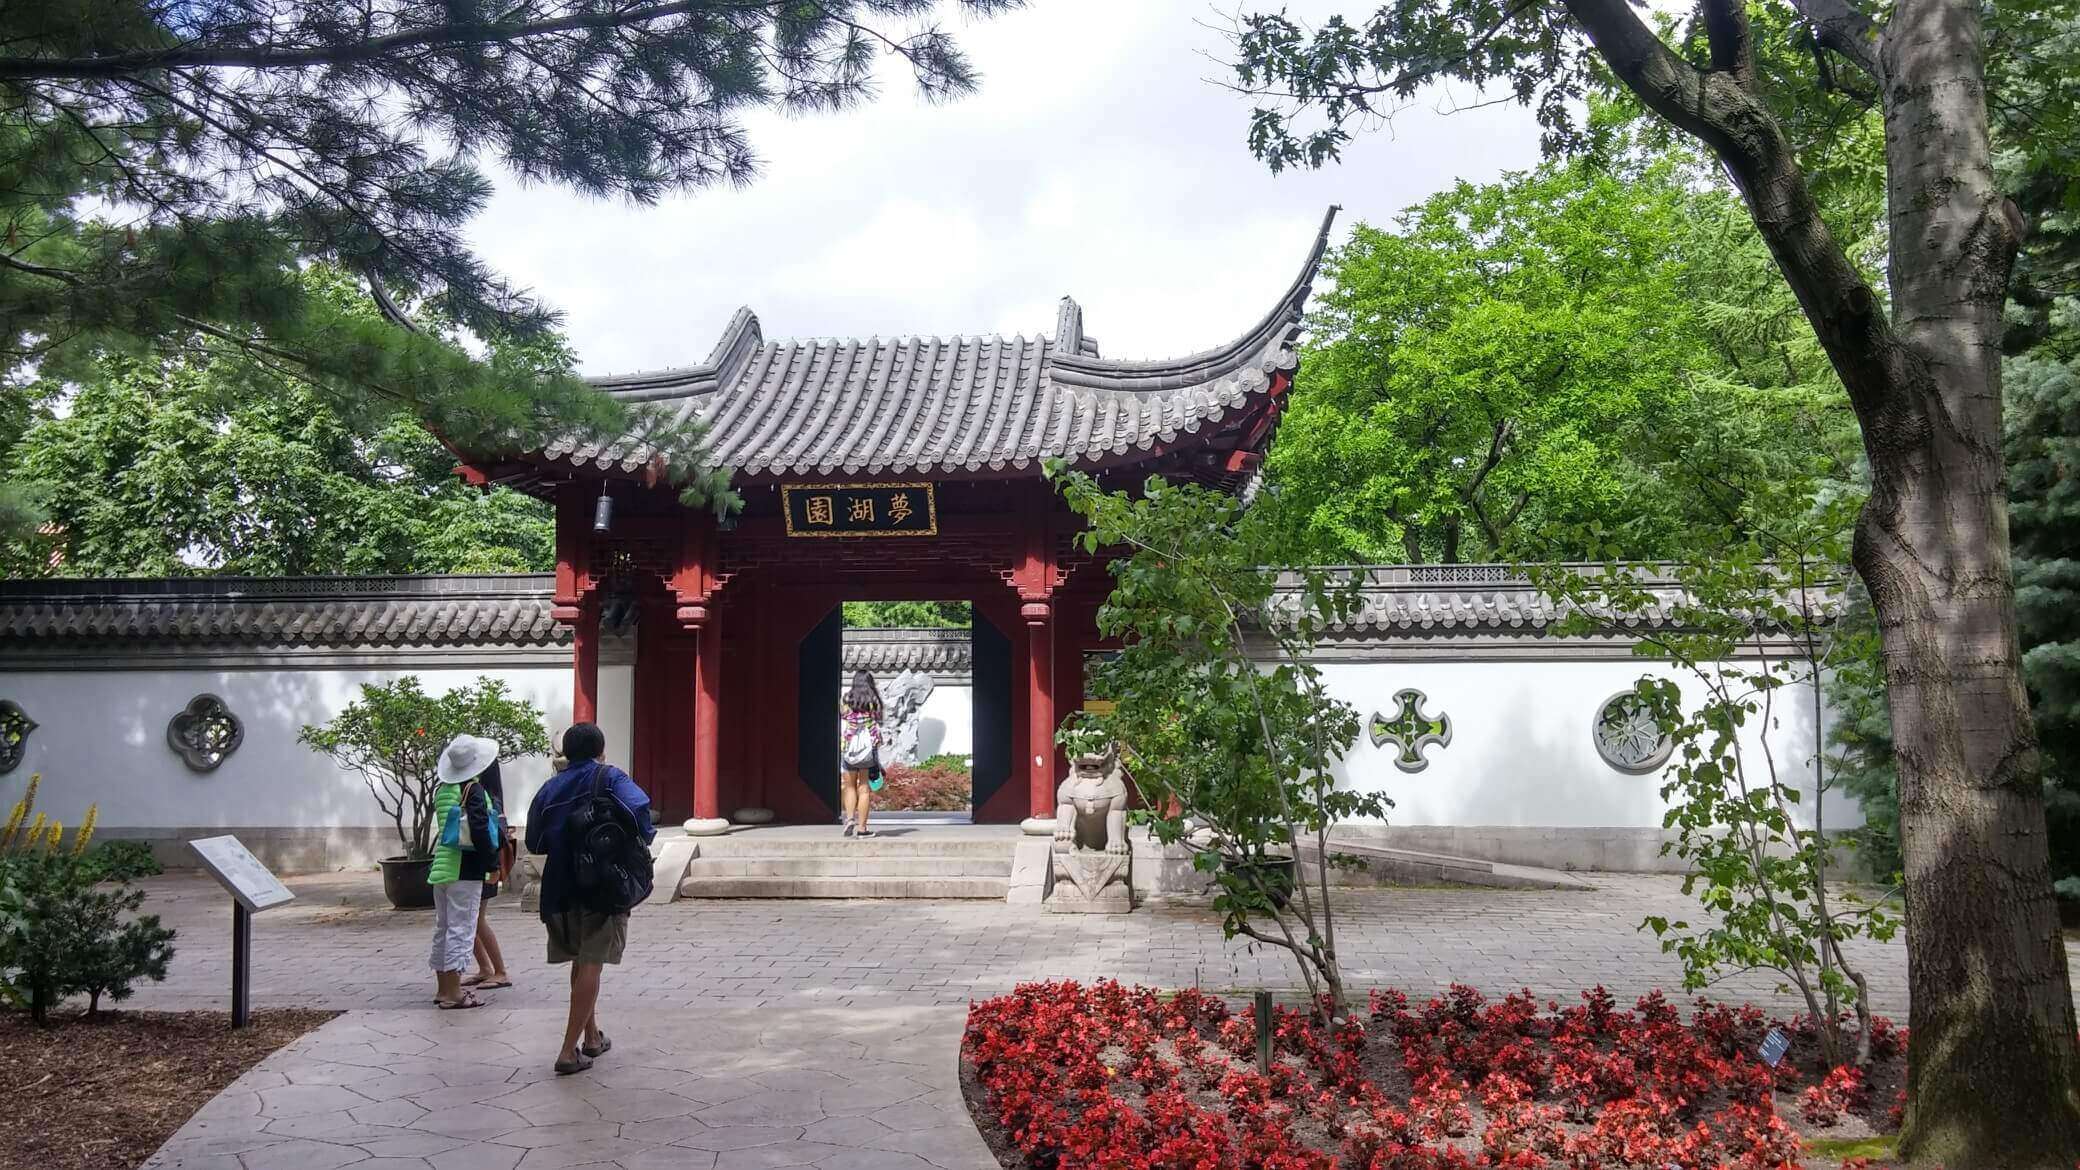 Gate to the Chinese garden